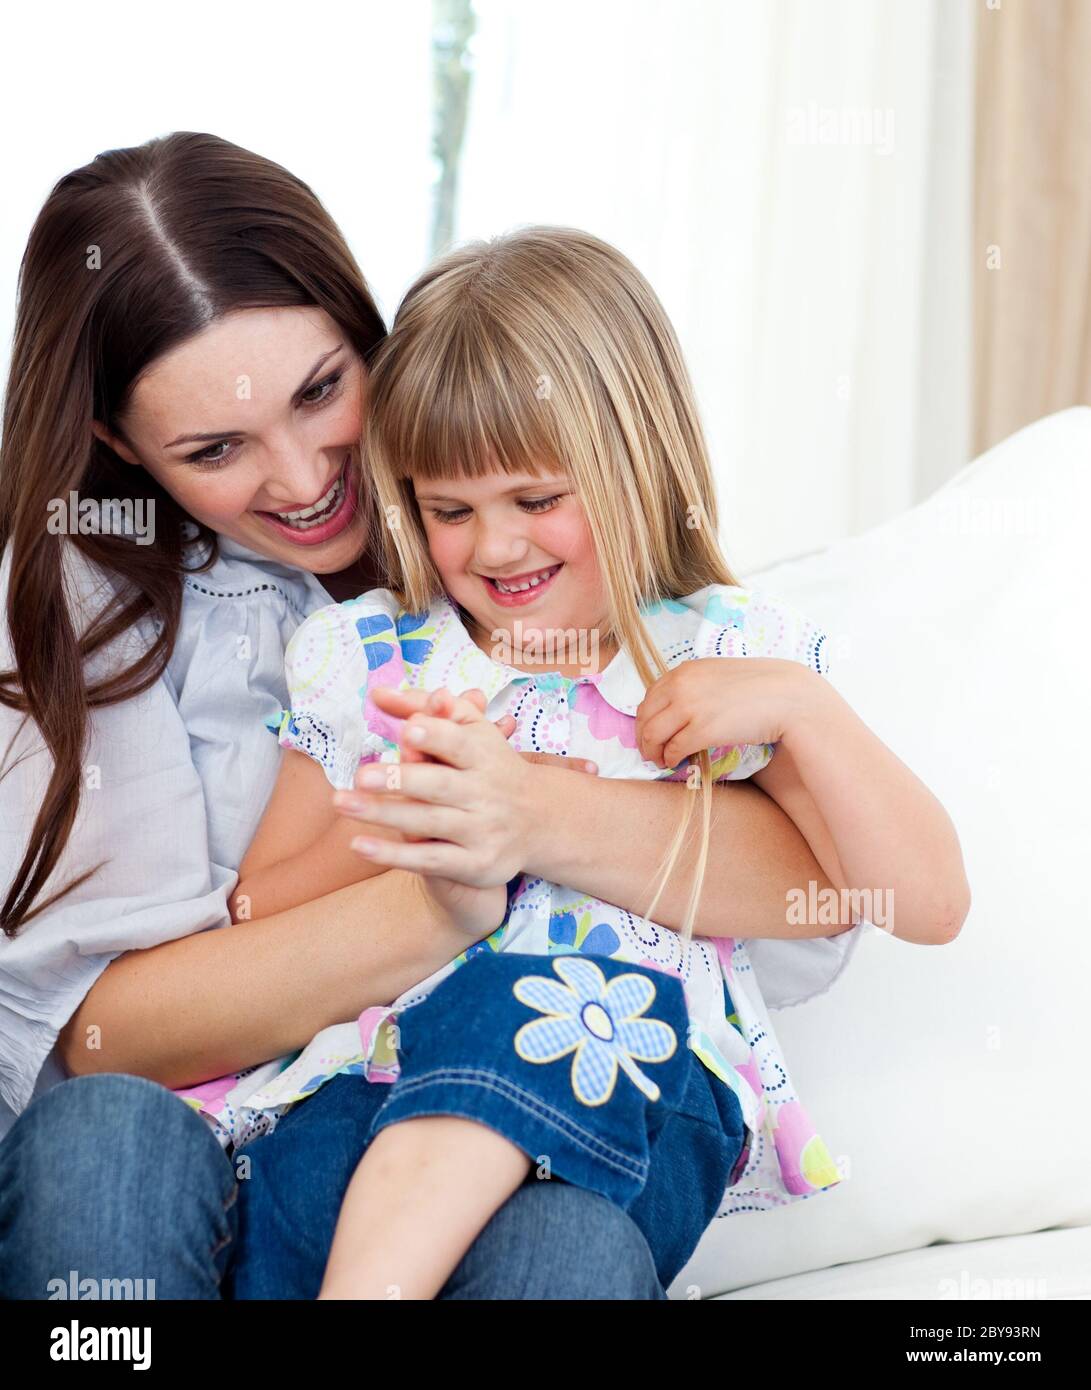 Cute girl sitting on her mother's lap celebrating a goal Stock Photo